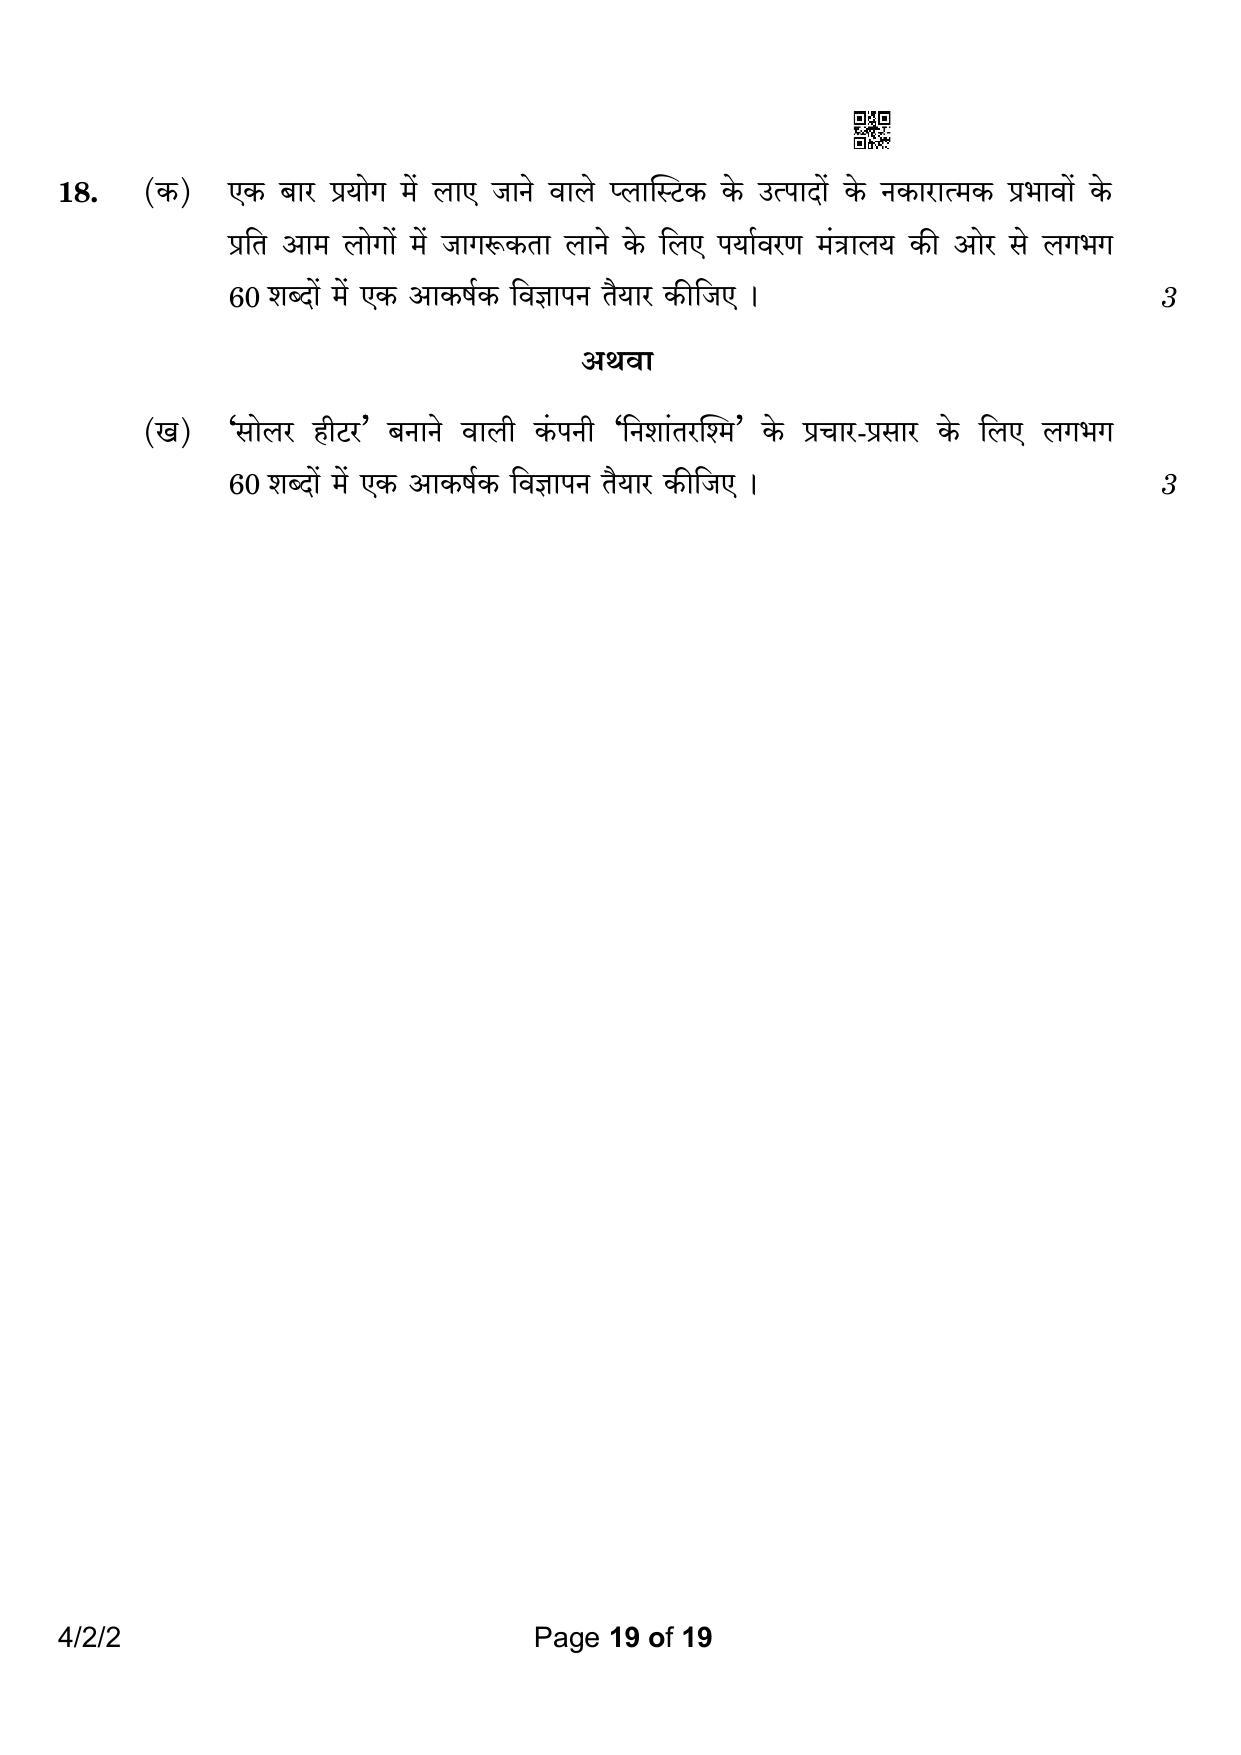 CBSE Class 10 4-2-2 Hindi B 2023 Question Paper - Page 19